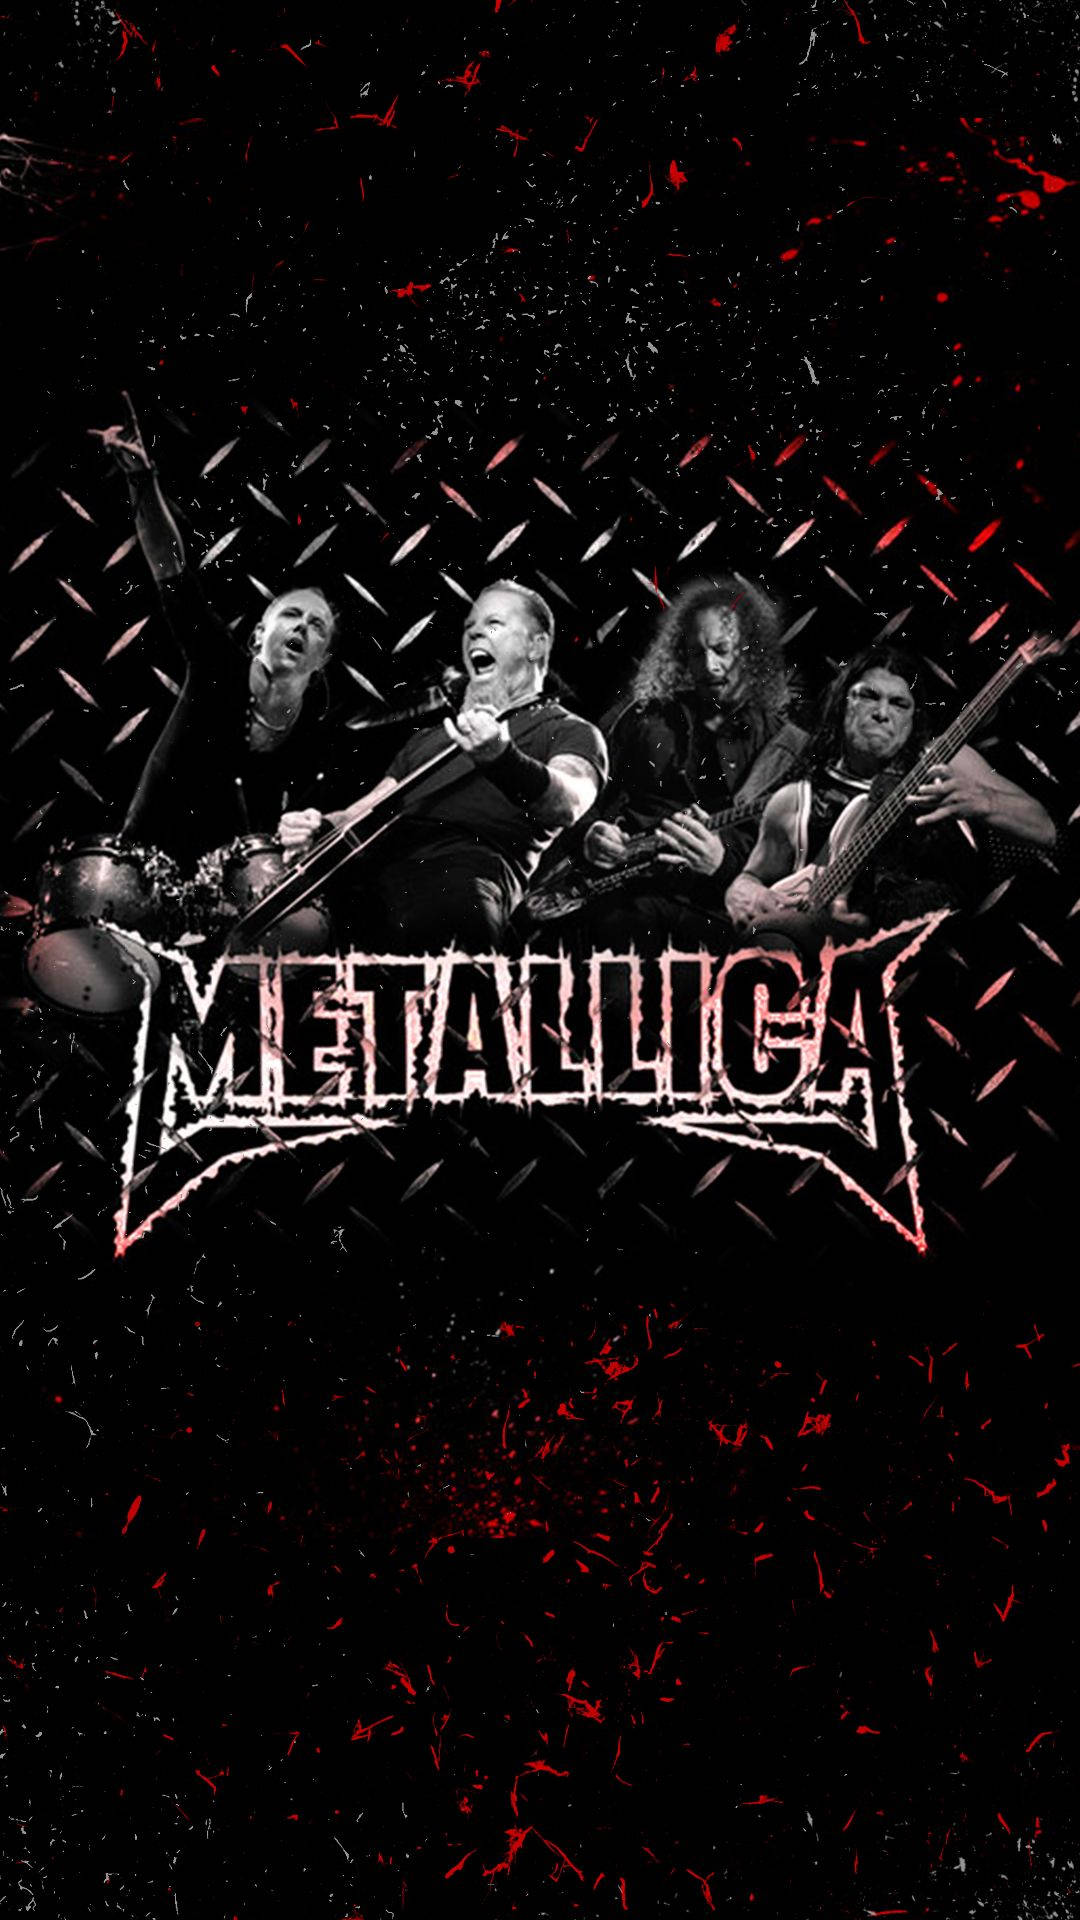 Iconic heavy metal band Metallica performs live Wallpaper